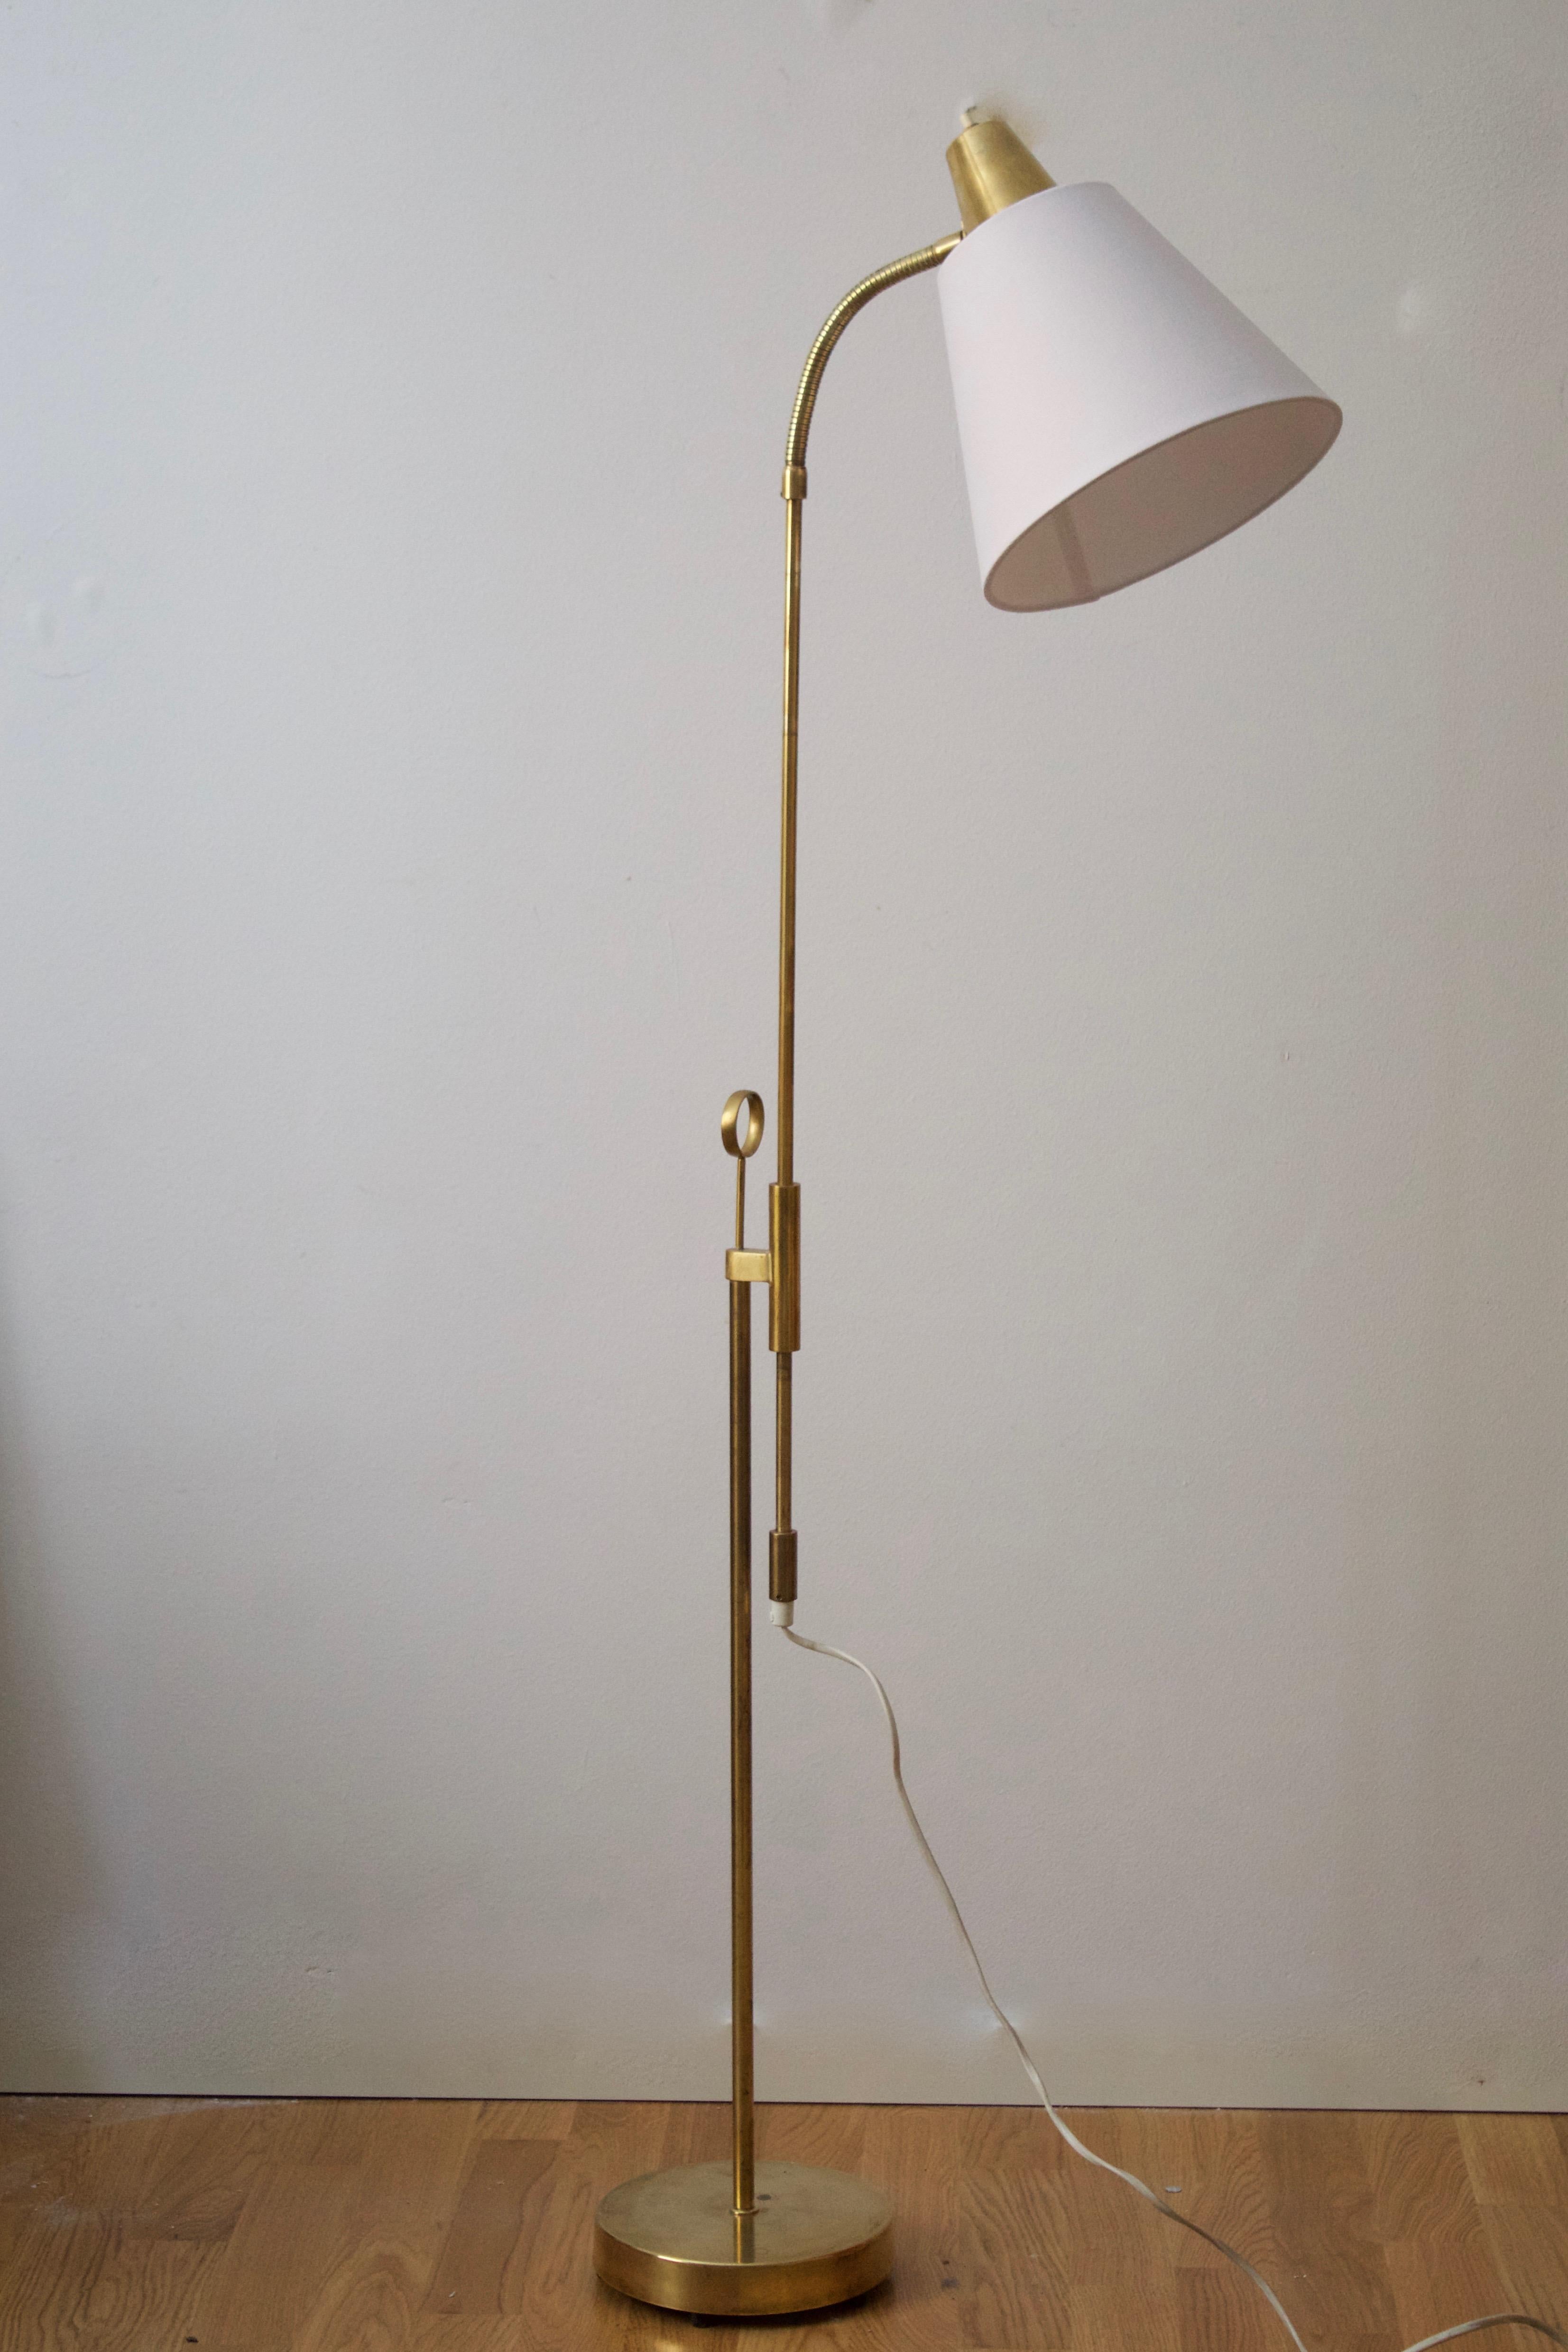 An adjustable floor lamp. Produced by Falkenbergs Belysning.

Other designers of the period include Hans Bergström, Hans-Agne Jacobson, Alvar Aalto, Josef Frank, and Paavo Tynell.